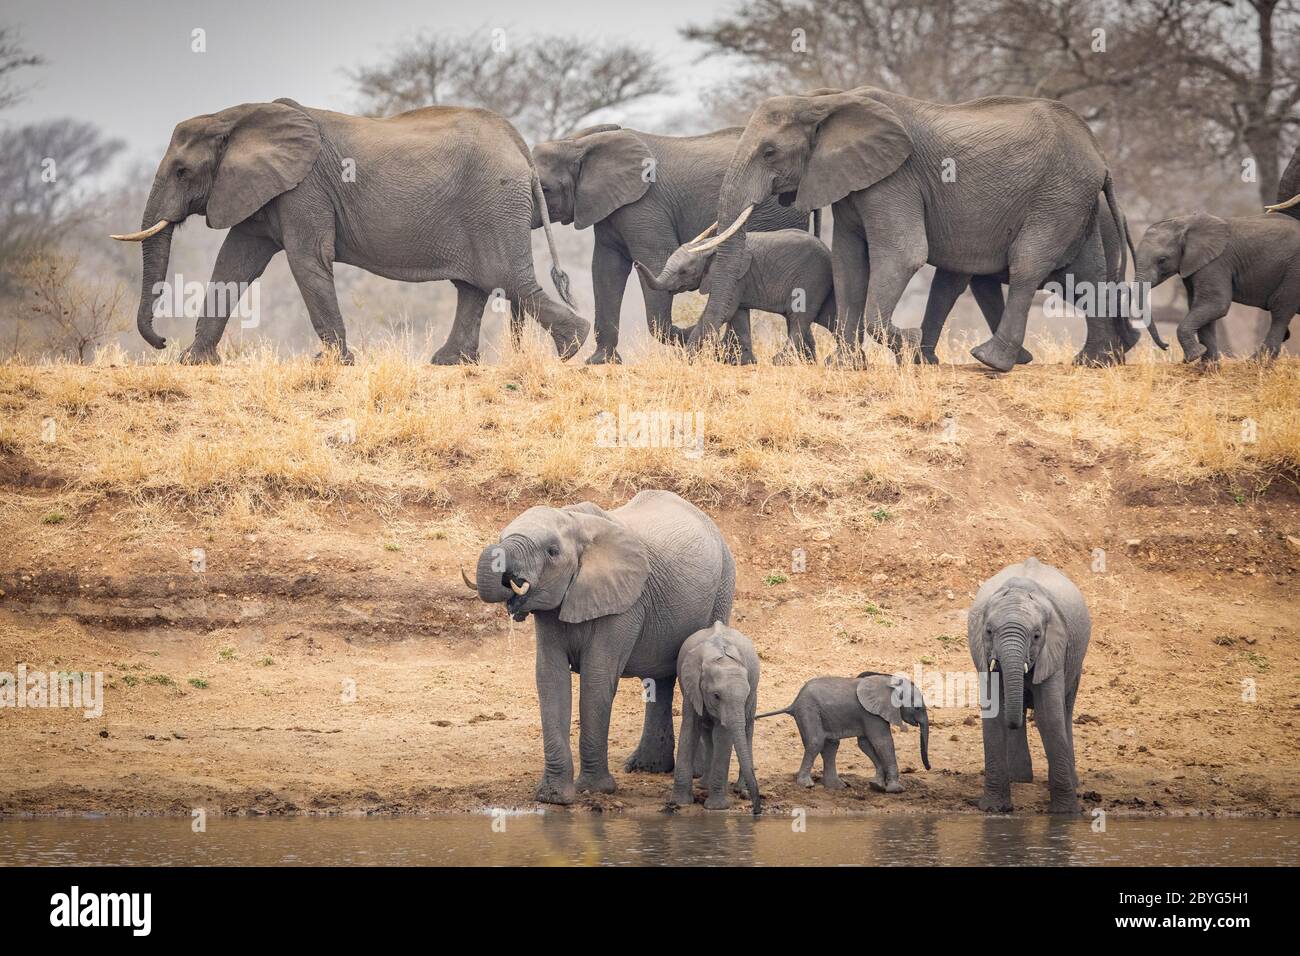 Elephant herd walking on dam wall with some already drinking water down below female, young and baby elephants in Kruger Park South Africa in winter Stock Photo